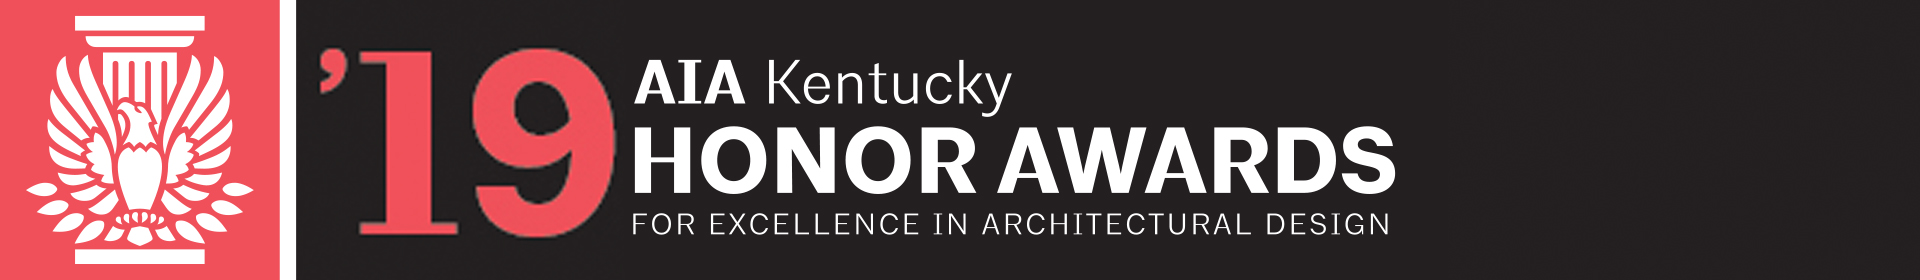 2019 AIA KY Honor Awards Event Banner